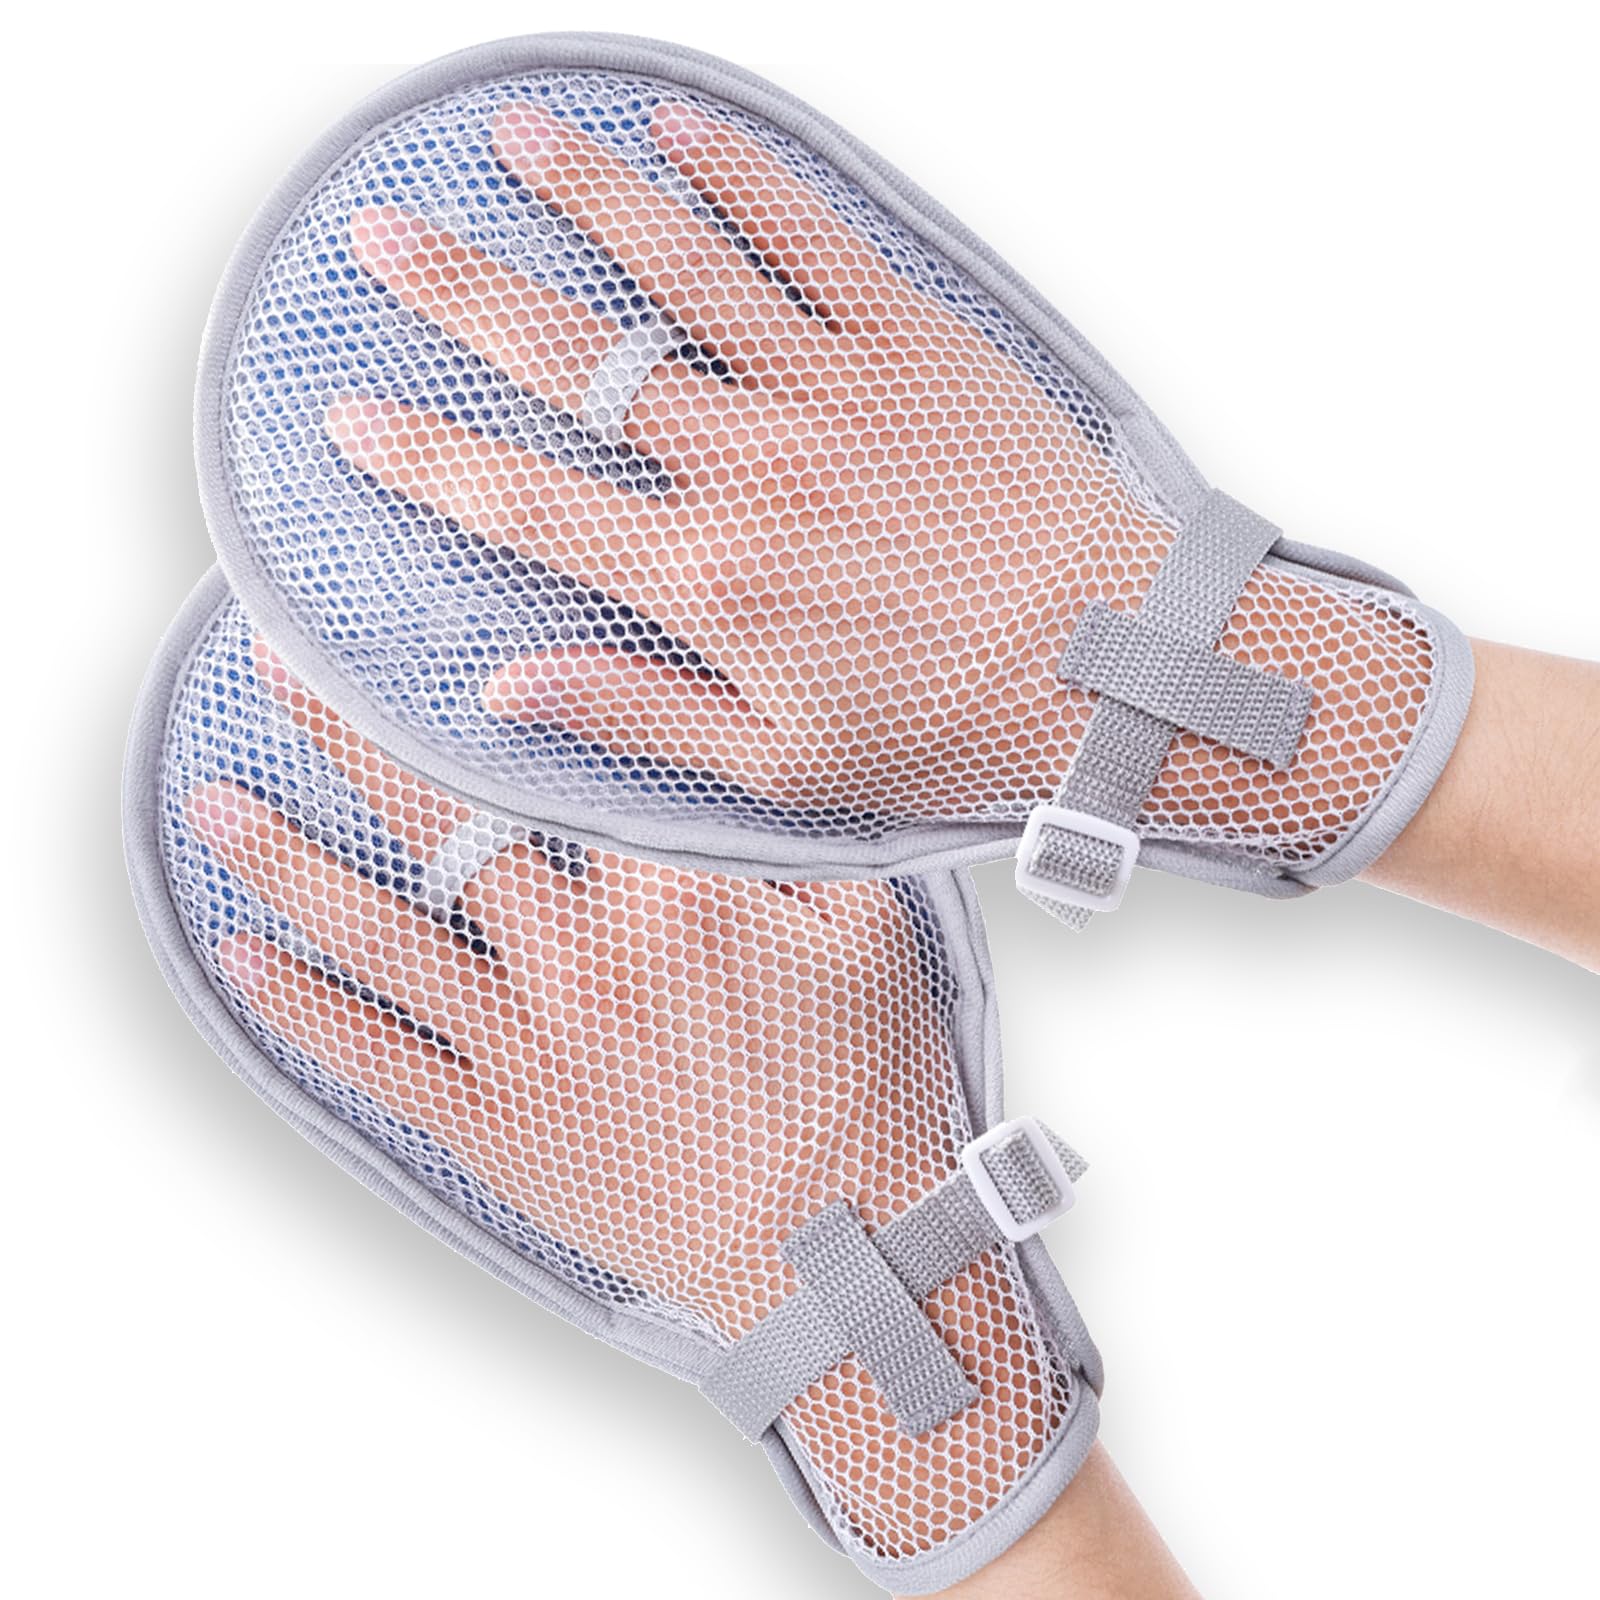 lefeke Medical Restraint Gloves - 2Pcs, Hand Protective Gloves Meshed for Dementia Patients or Elderly, Autistic Child, Bed Restraints Mitts, Limb Holder, Movement Limited Ties for Hands